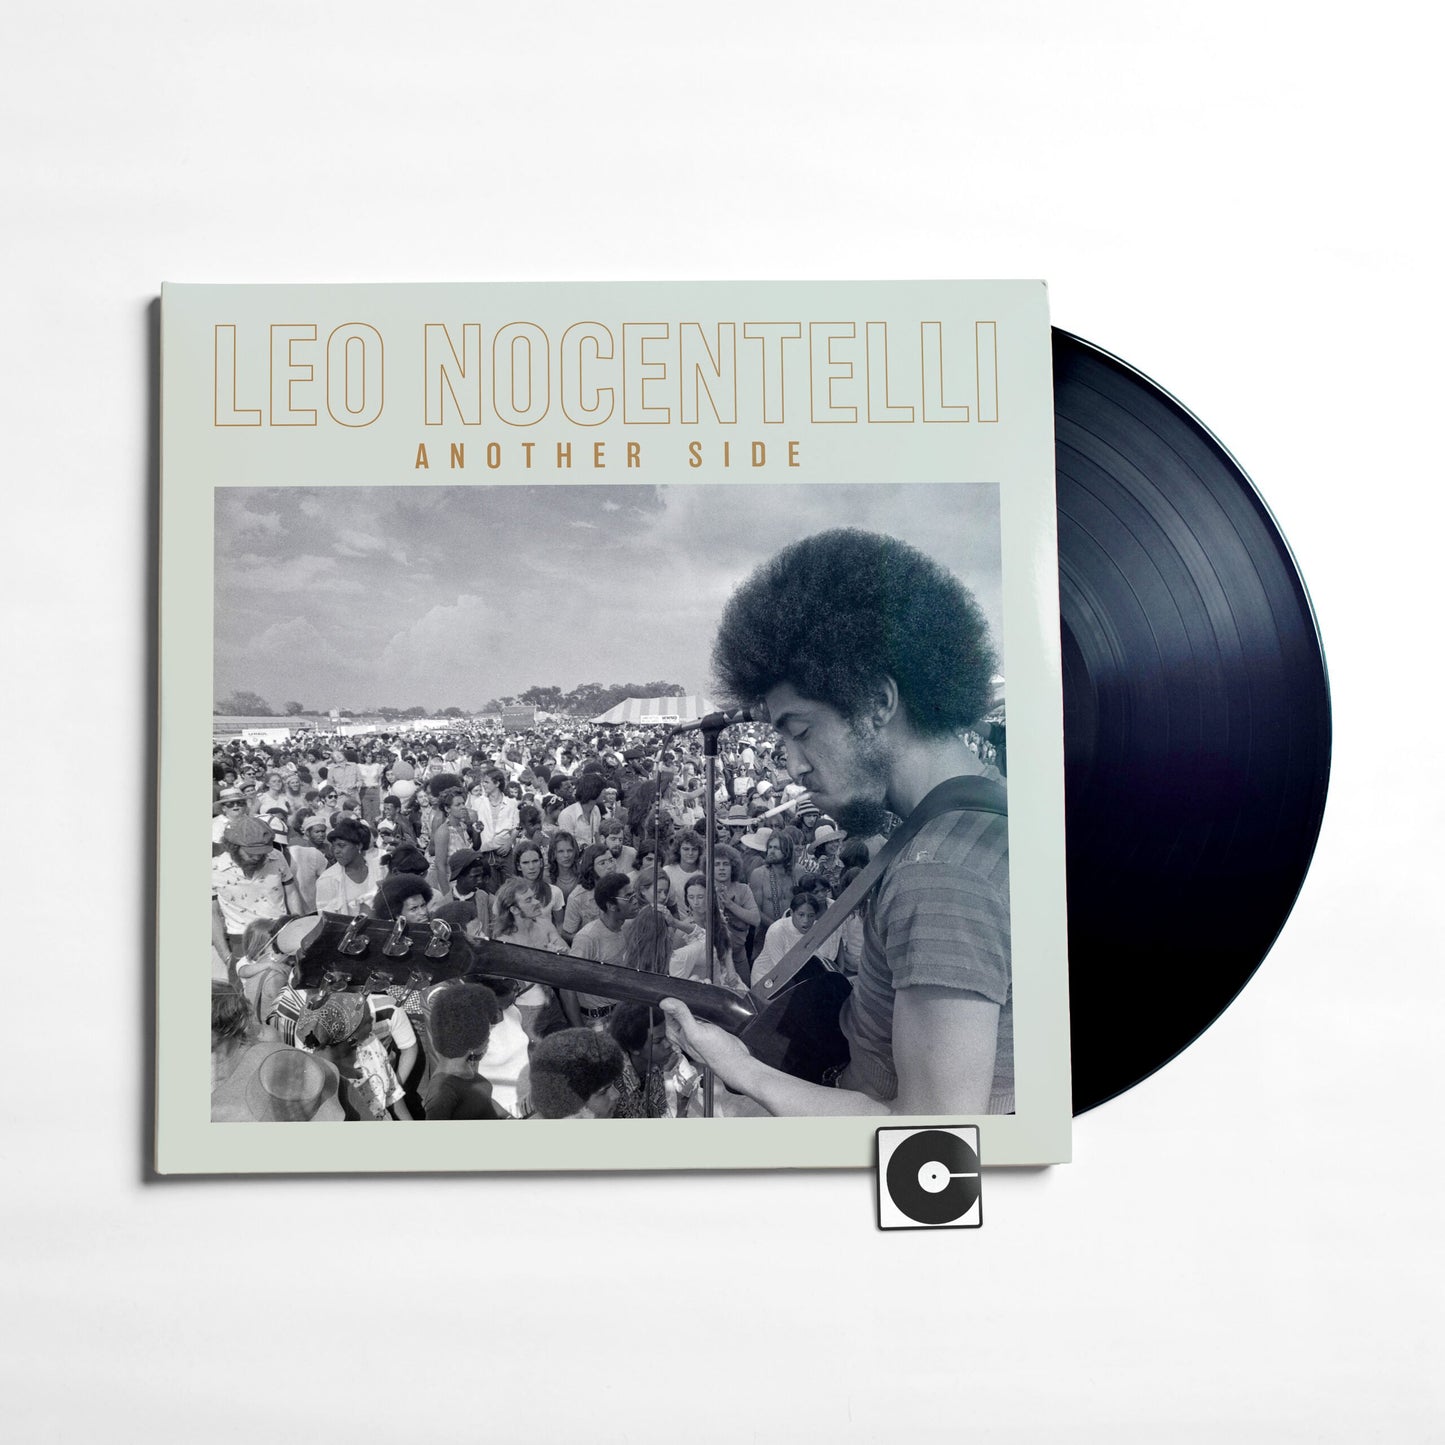 Leo Nocentelli - "Another Side"